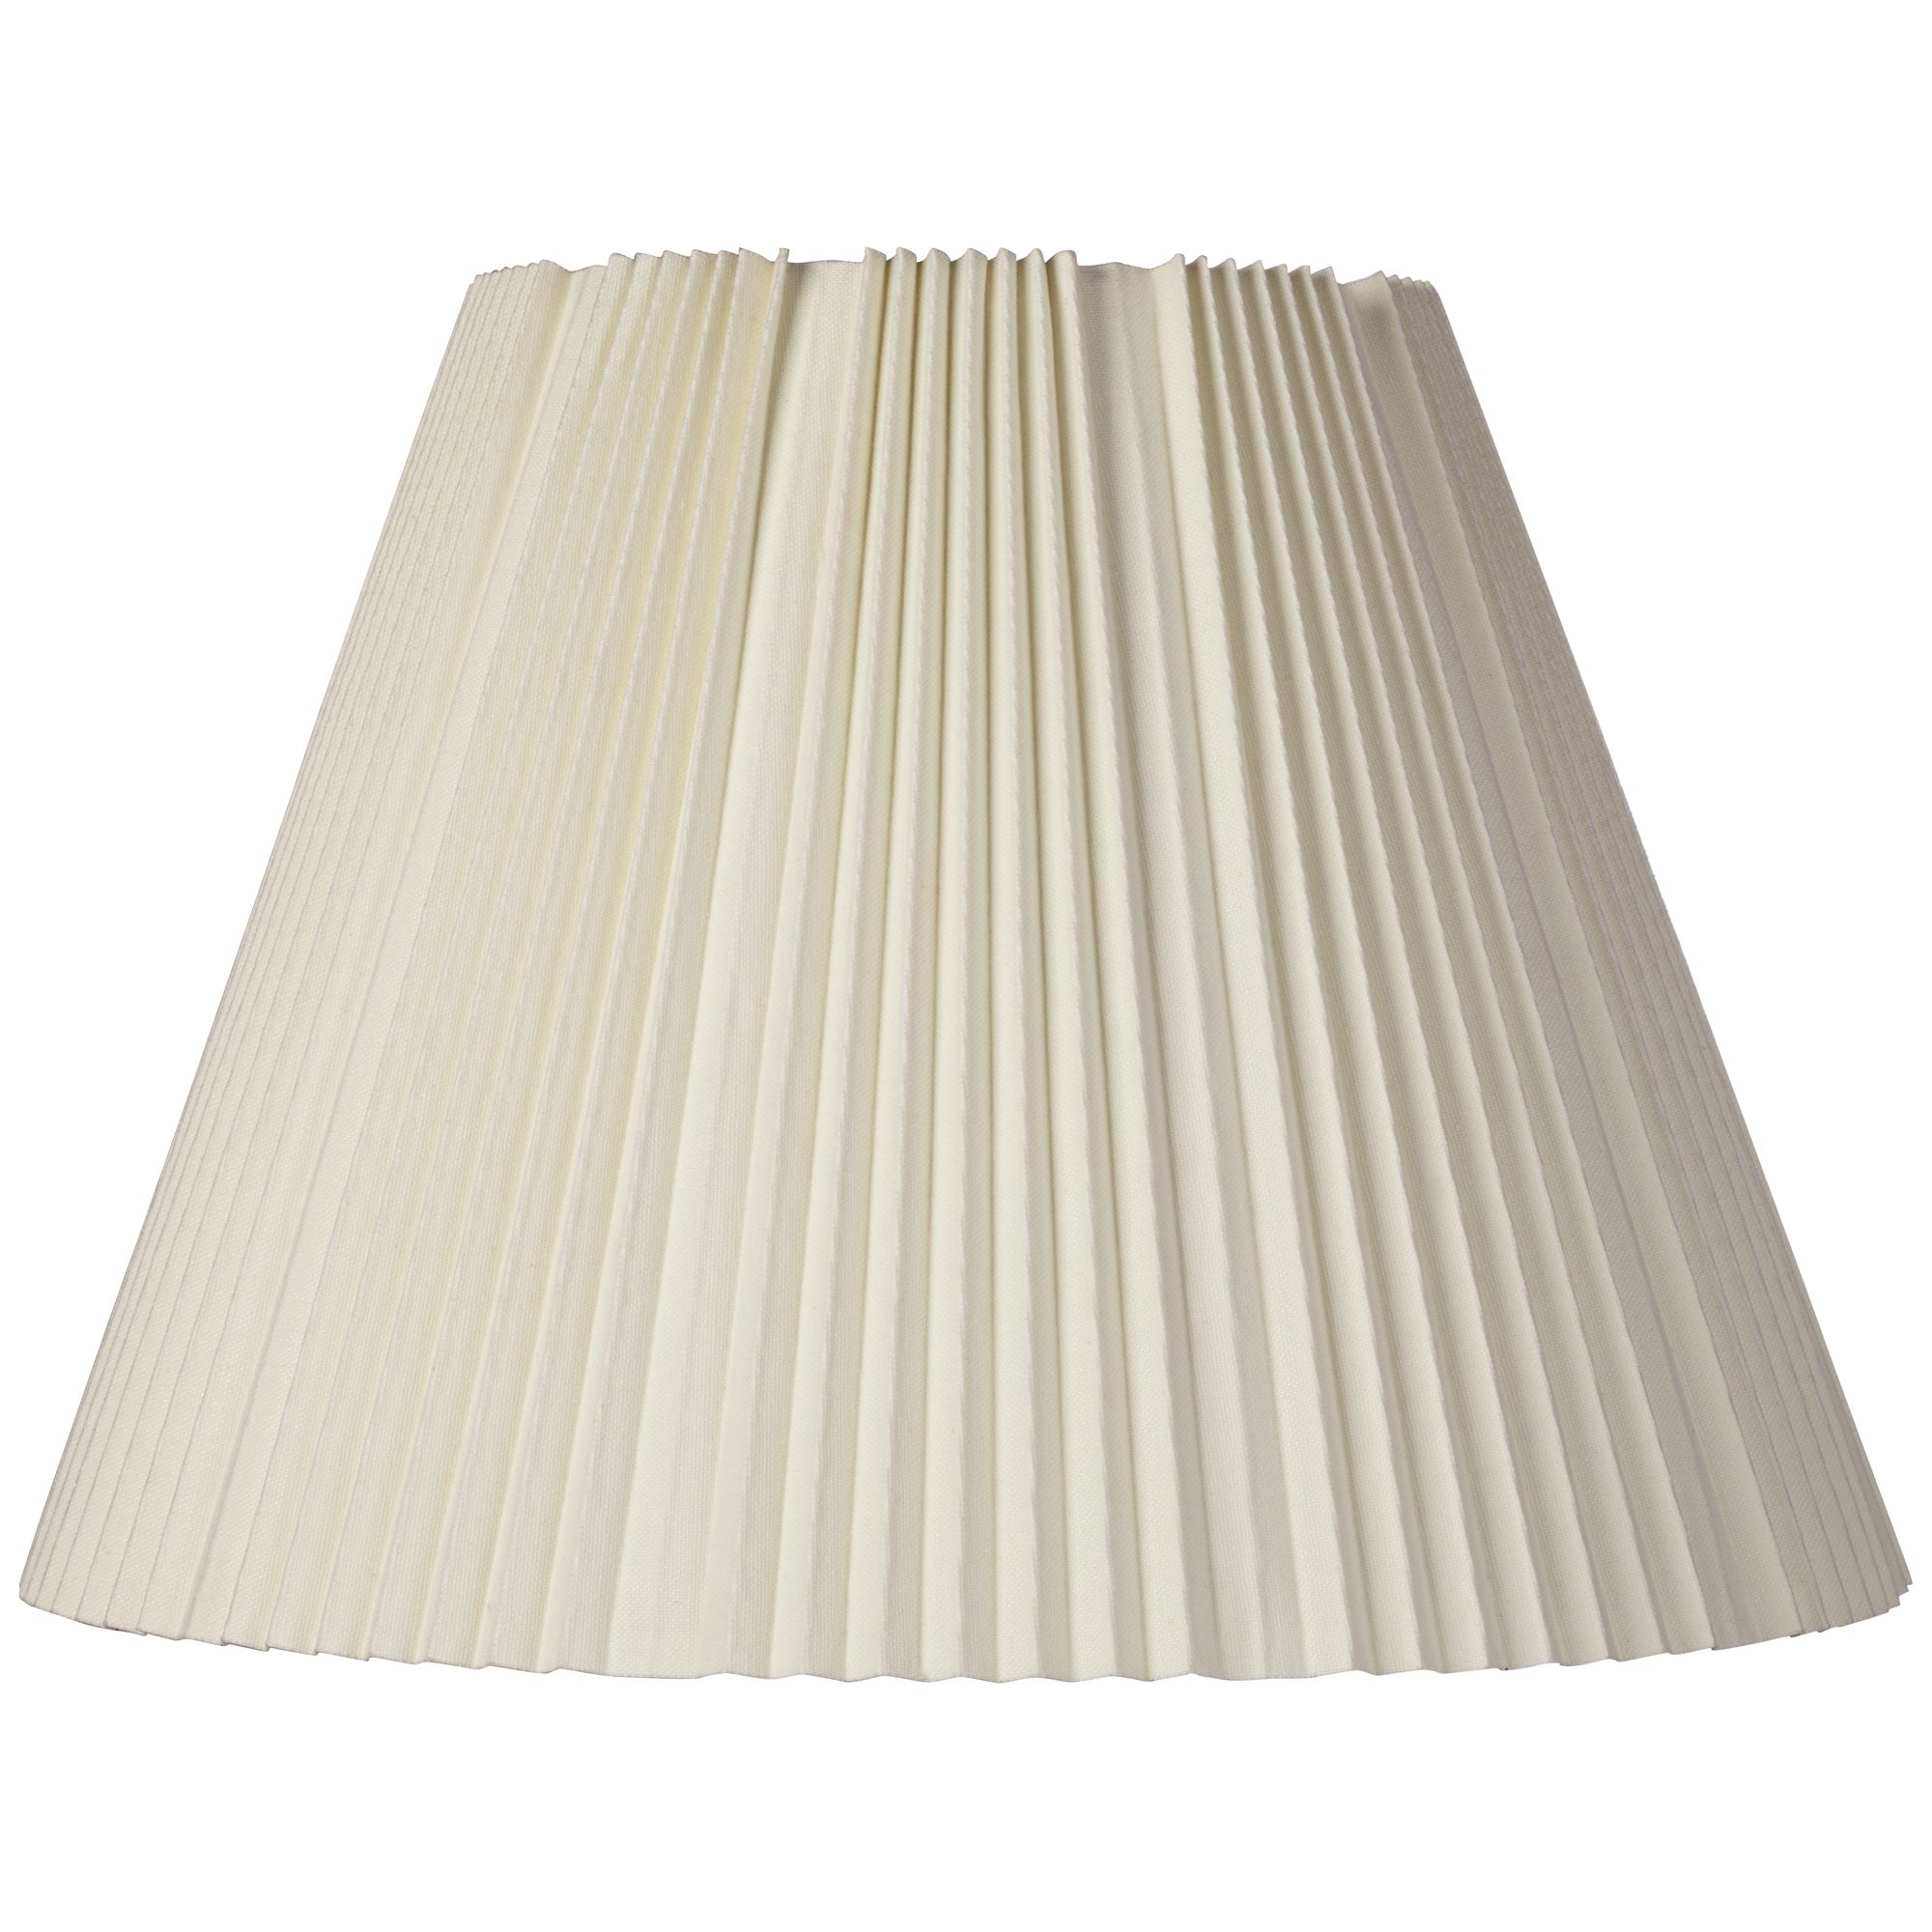 Springcrest Eggshell Pleated Large Empire Lamp Shade 9" Top x 17" Bottom x 11.75" High x 12.25" Slant (Spider) Replacement with Harp and Finial - image 1 of 6